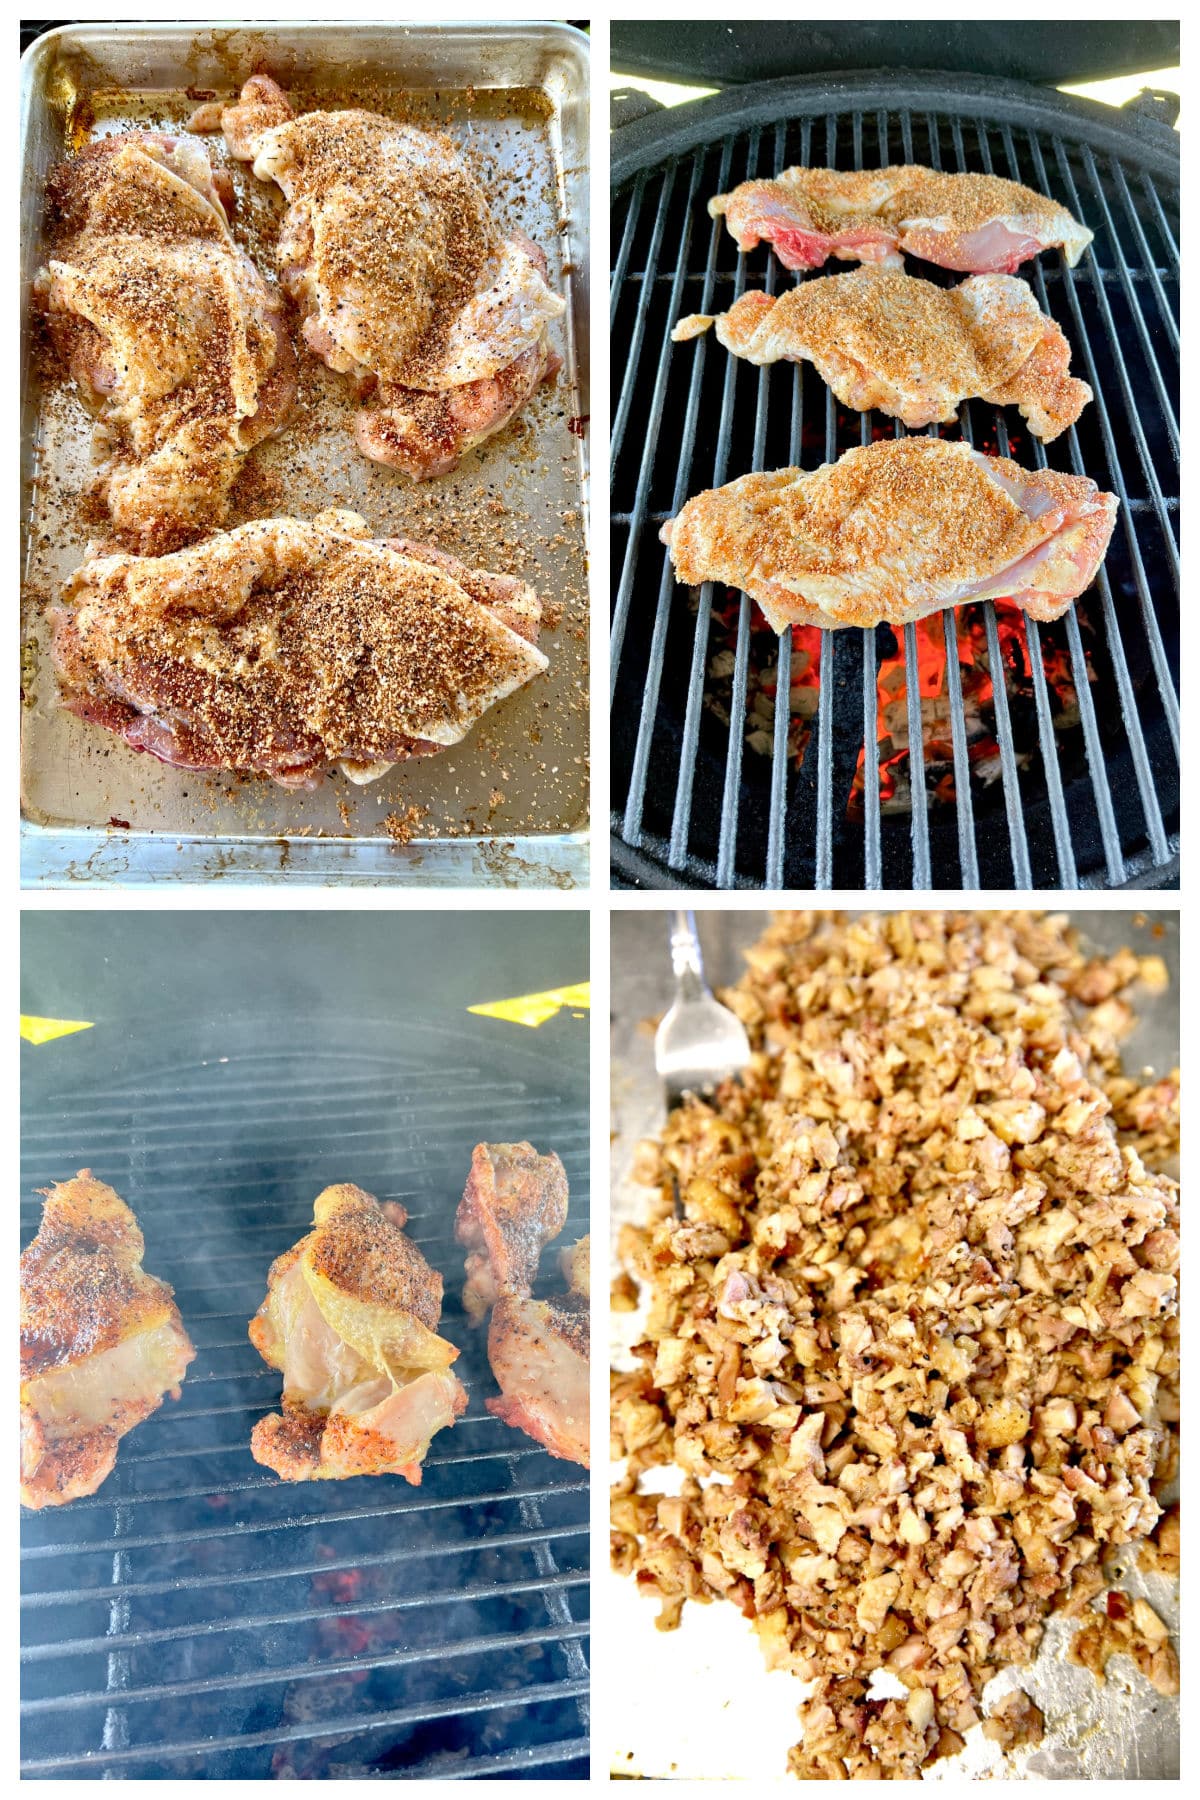 Collage: Grilling chicken thighs for stuffed peppers- seasoning, grilling, chopped.